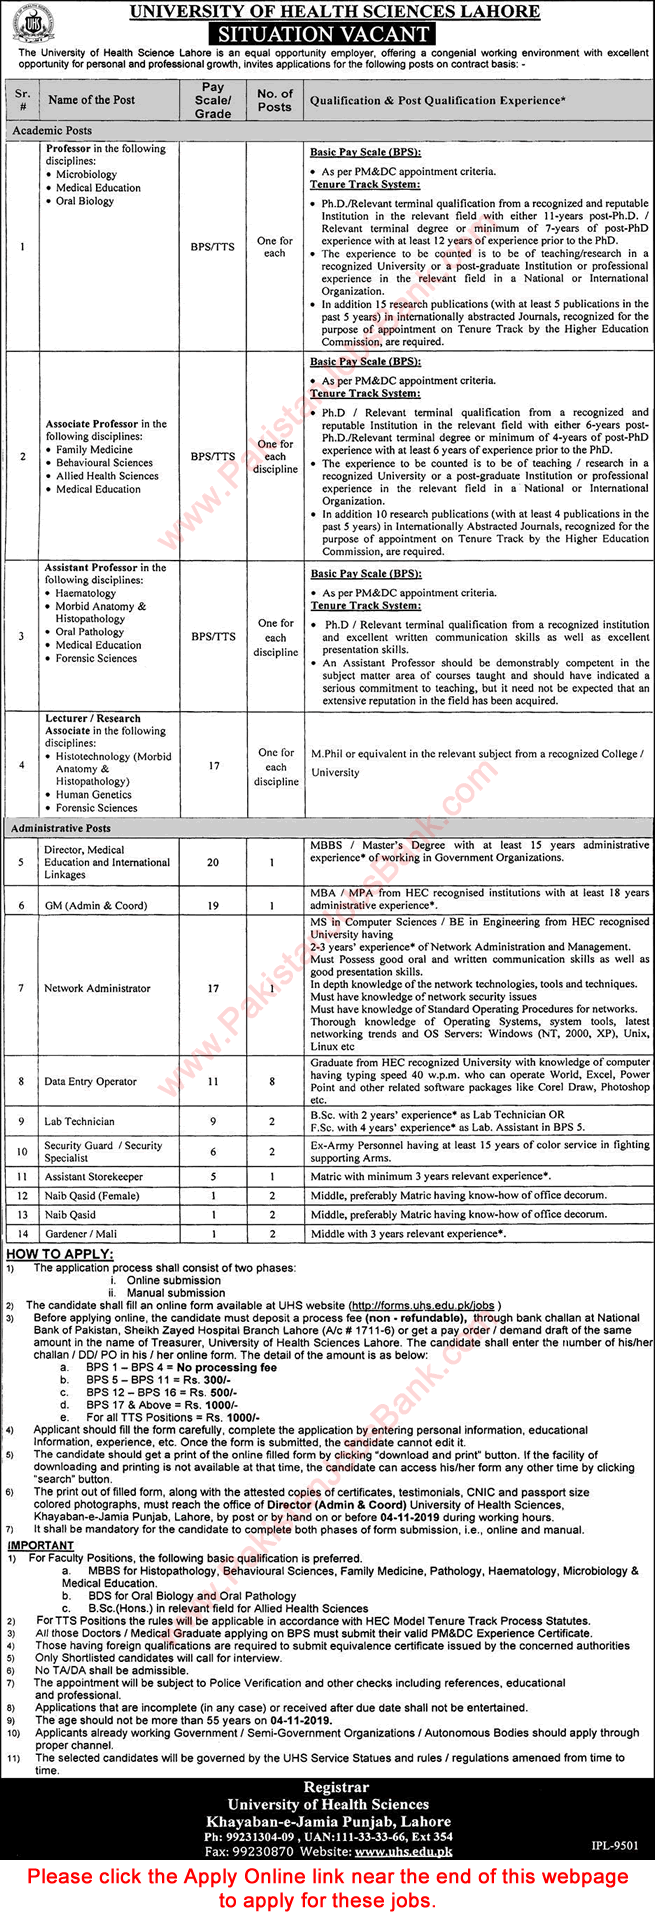 University of Health Sciences Lahore Jobs 2019 October UHS Apply Online Teaching Faculty, Data Entry Operators & Others Latest